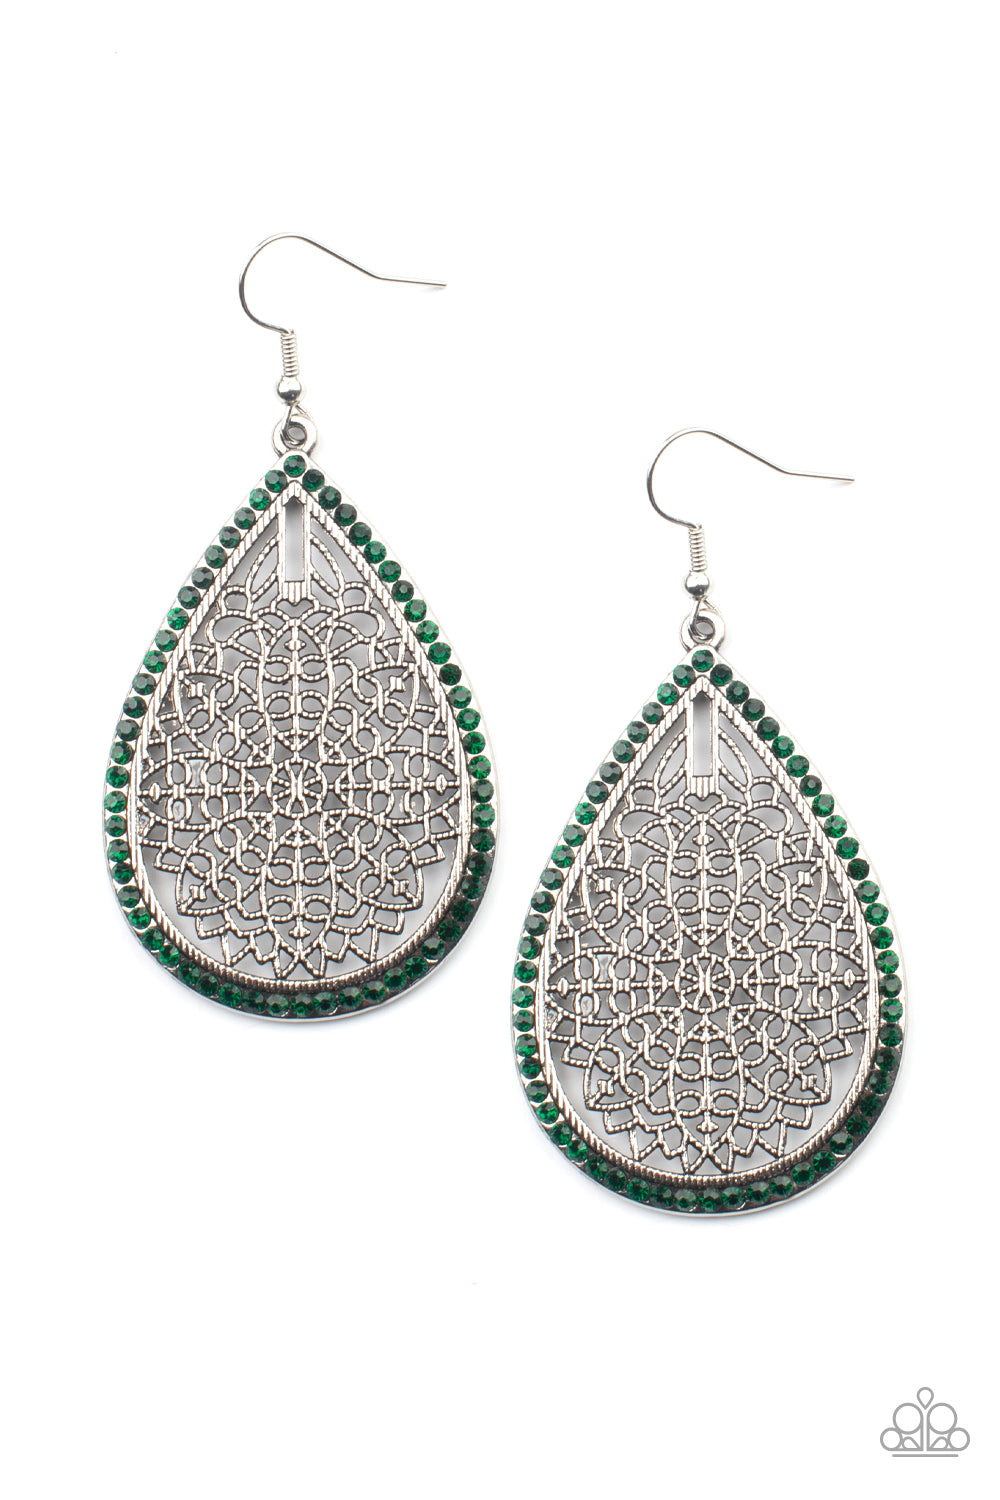 Fleur de Fantasy Green Earring - Paparazzi Accessories  Bordered in dainty green rhinestones, the center of an oversized silver teardrop is filled with an airy floral pattern for a seasonal flair. Earring attaches to a standard fishhook fitting.  All Paparazzi Accessories are lead free and nickel free!  Sold as one pair of earrings.